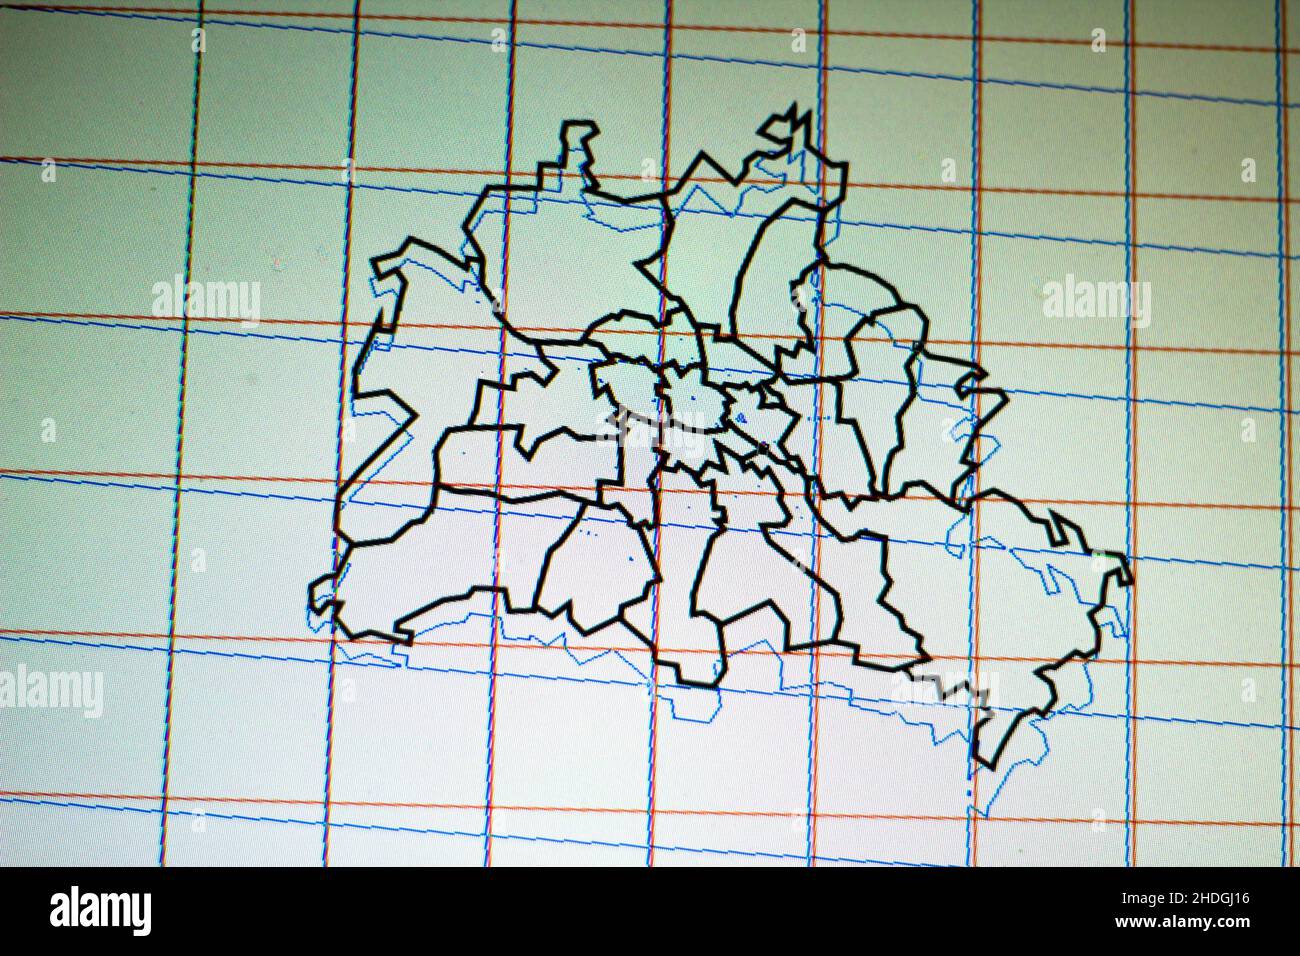 berlin, district, cartography, districts, cartographies Stock Photo